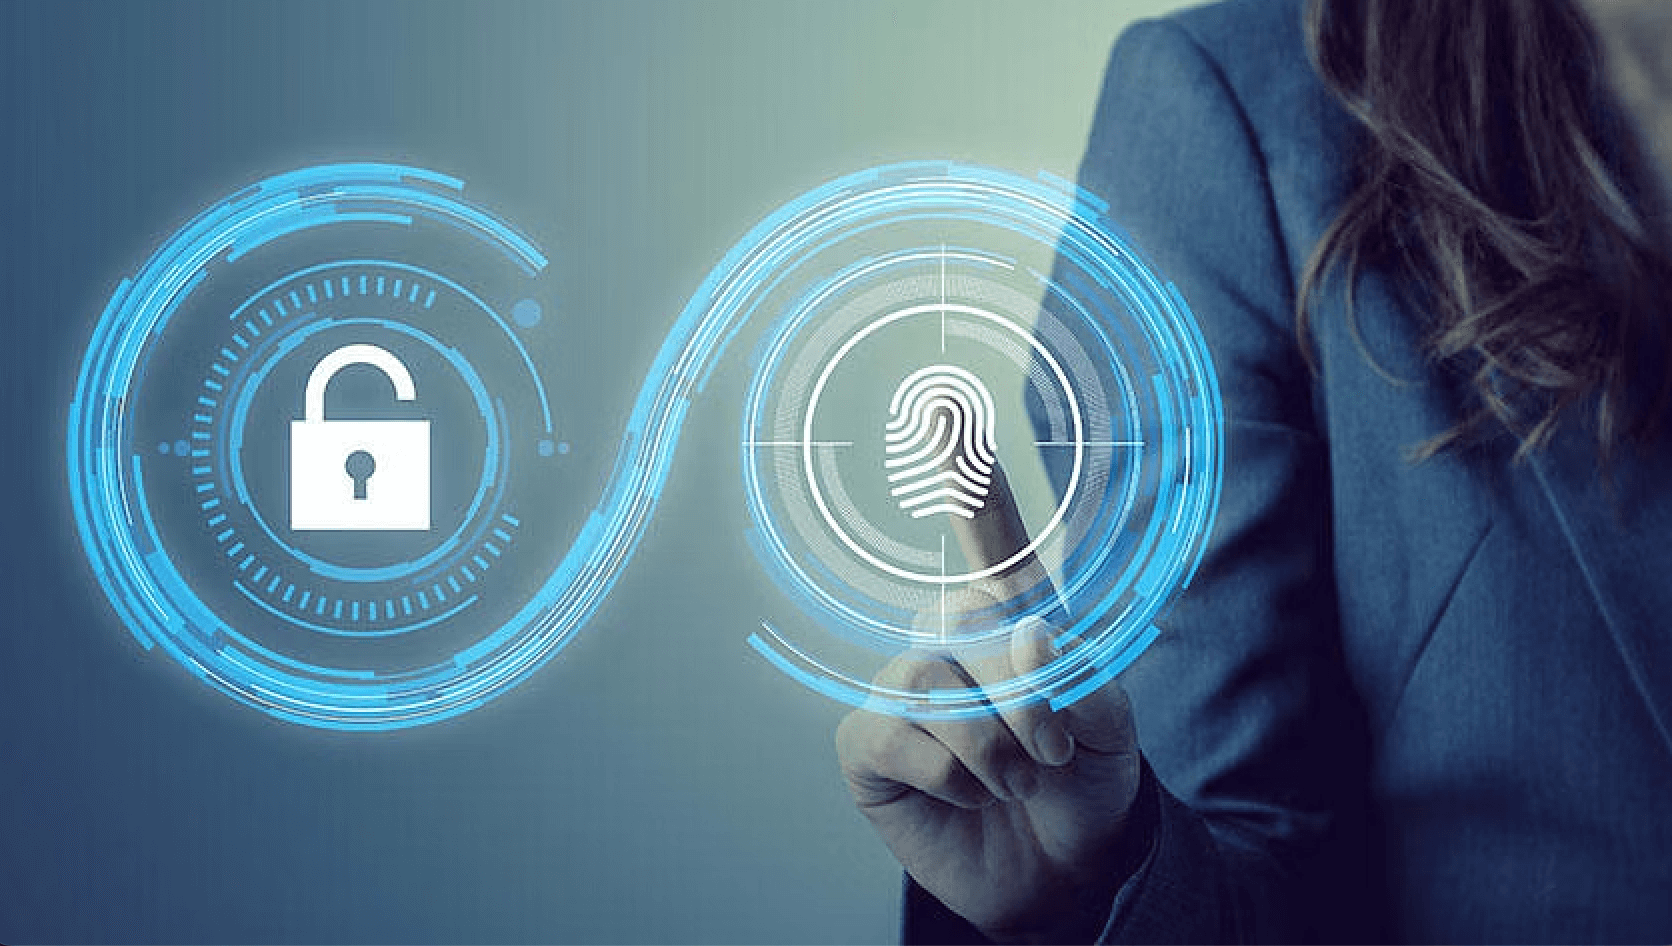 Successful Adoption of 3D Secure Authentication Continues to Grow Globally